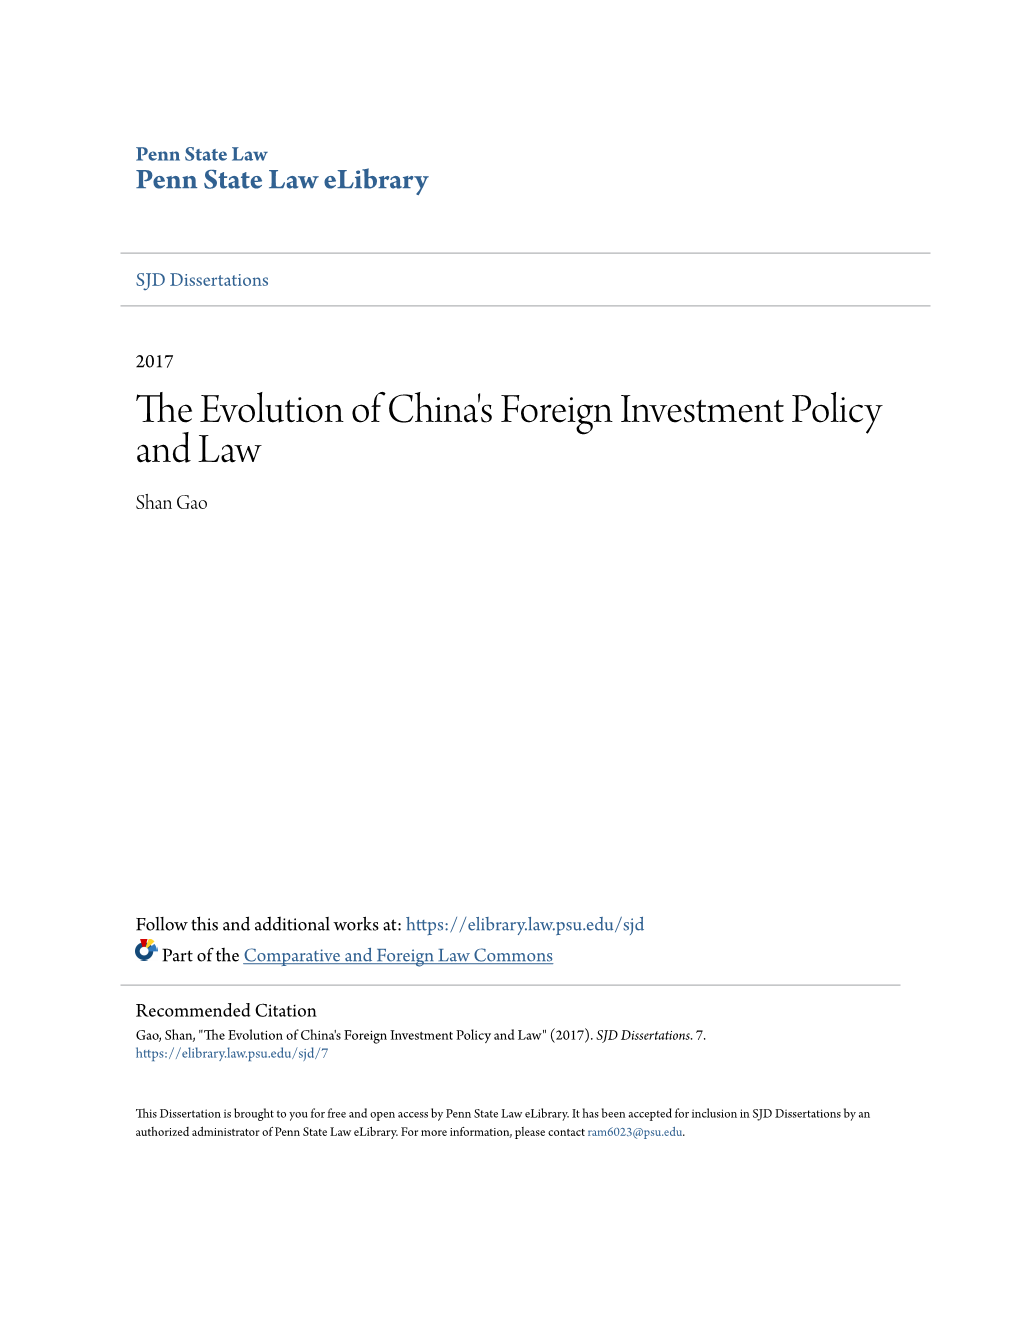 The Evolution of China's Foreign Investment Policy And